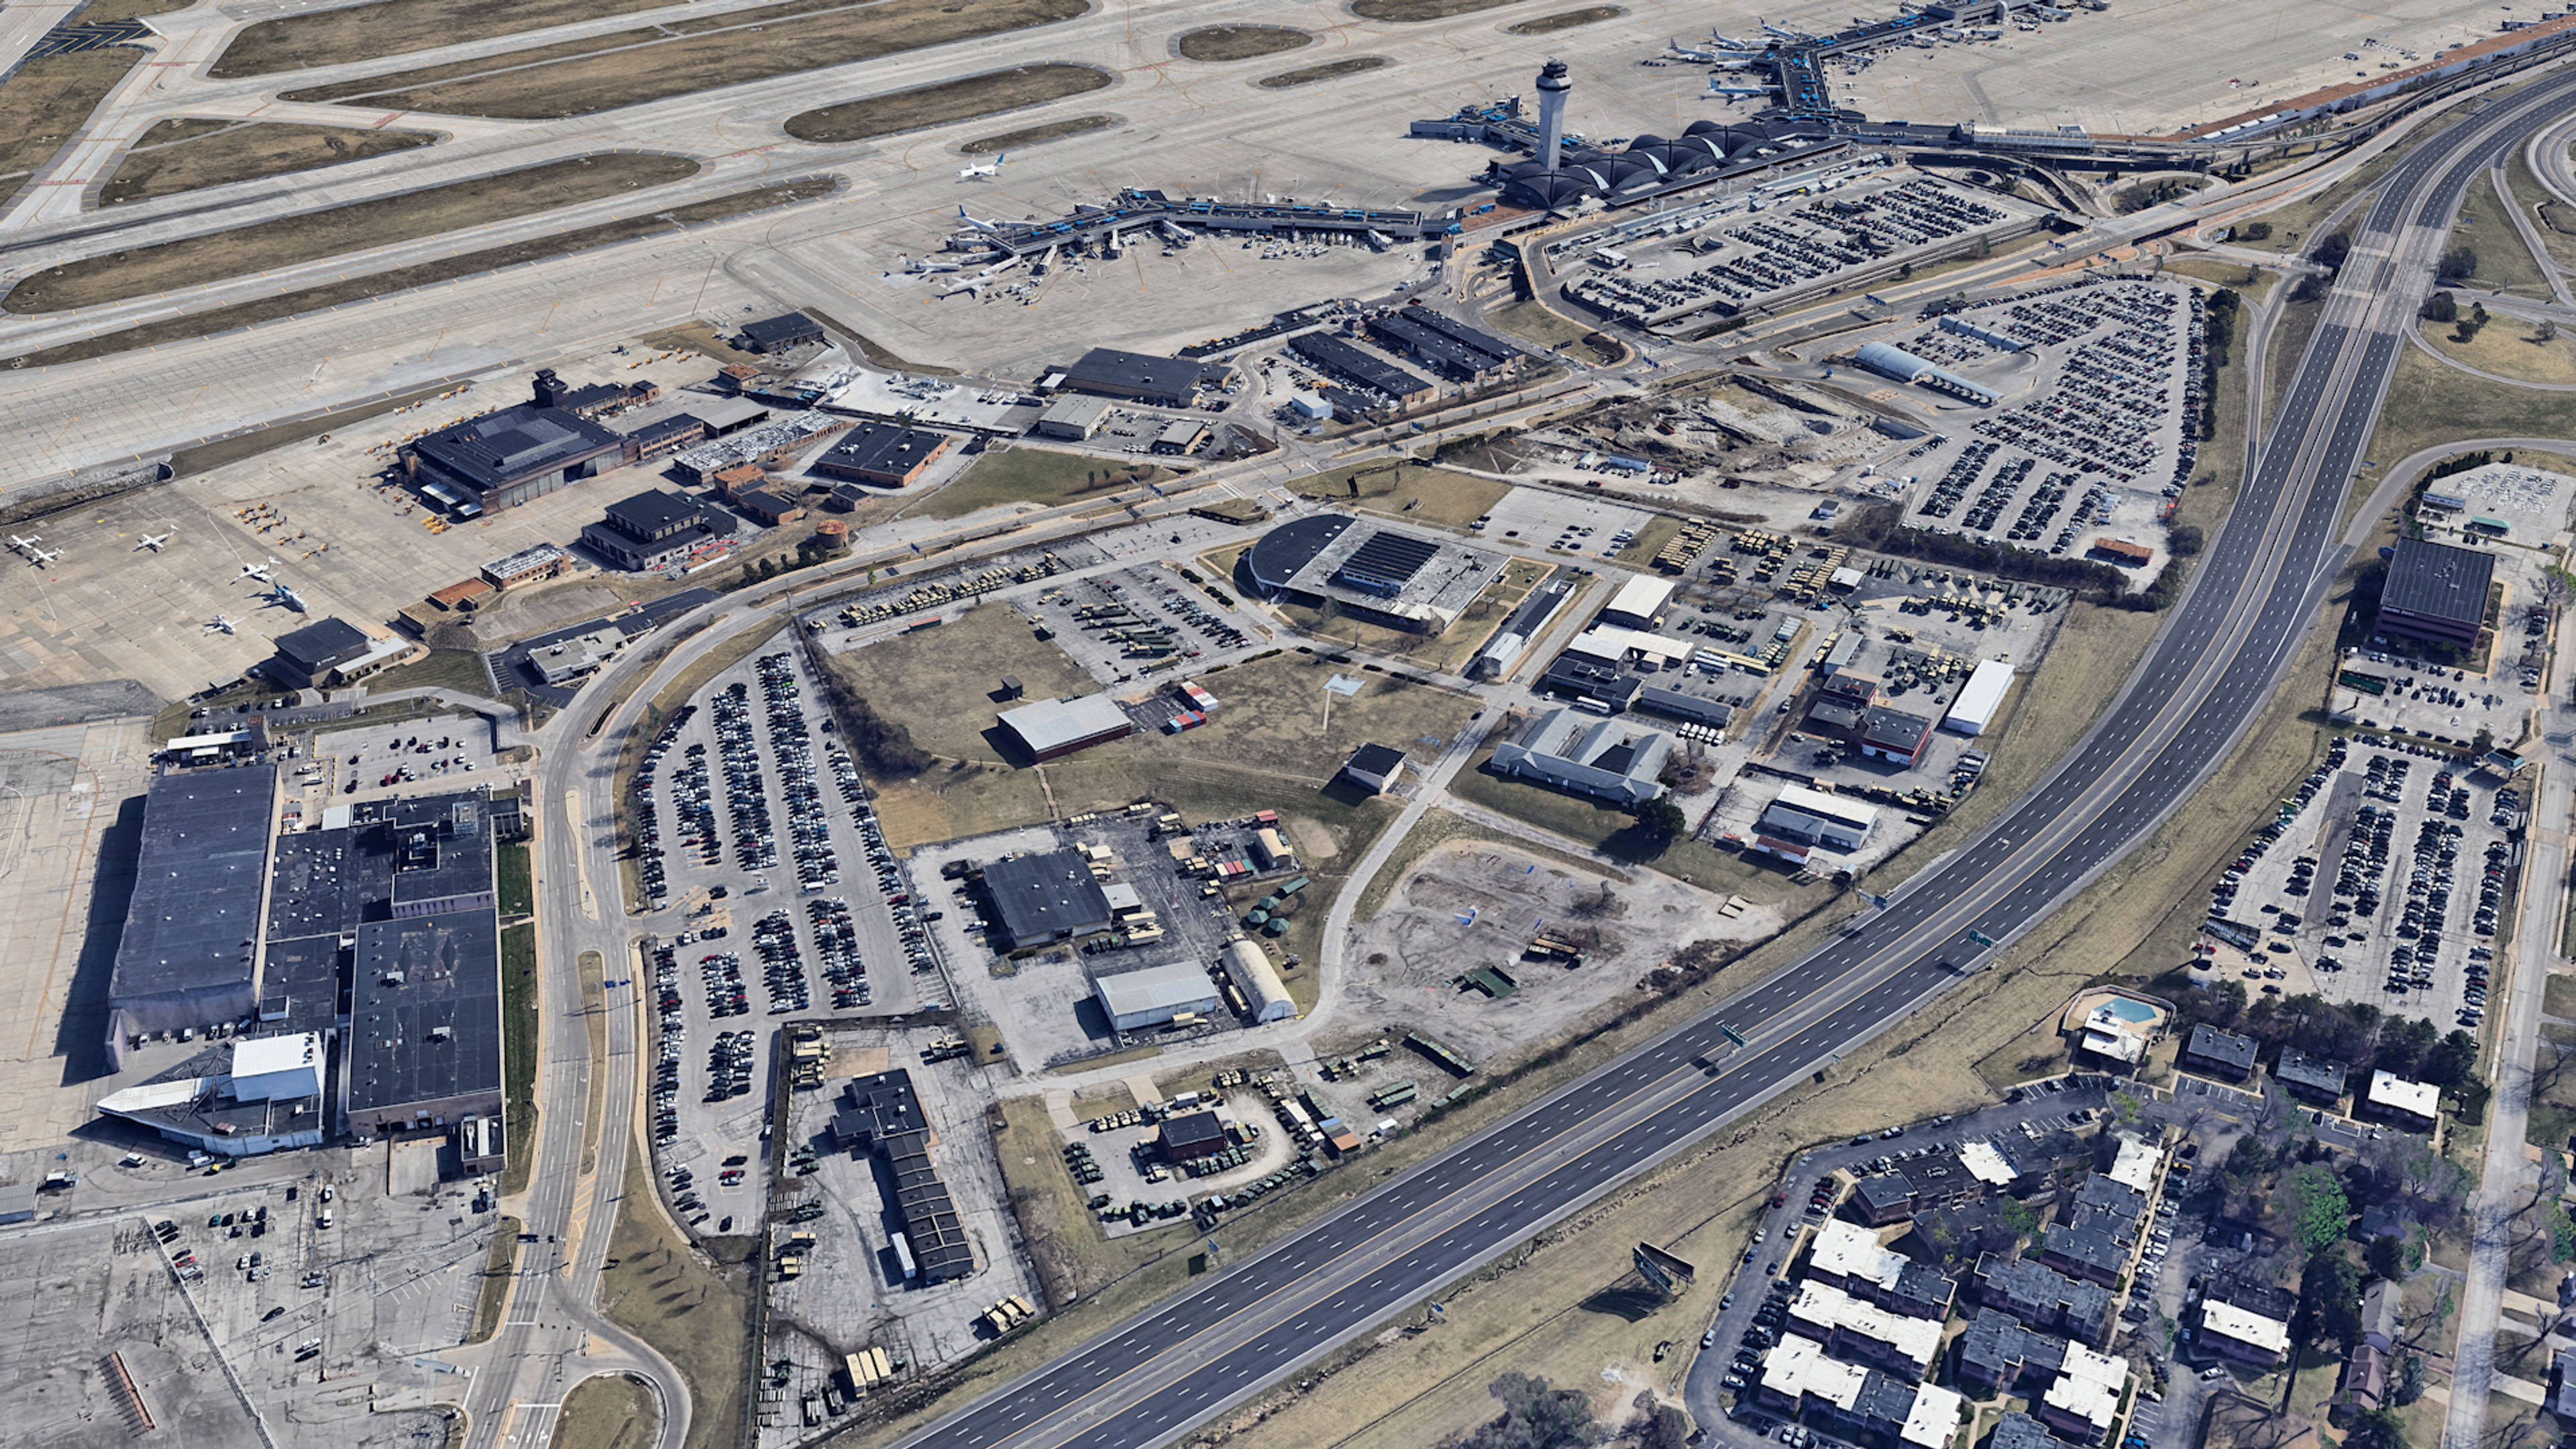  Aerial View of St Louis Airport Parking